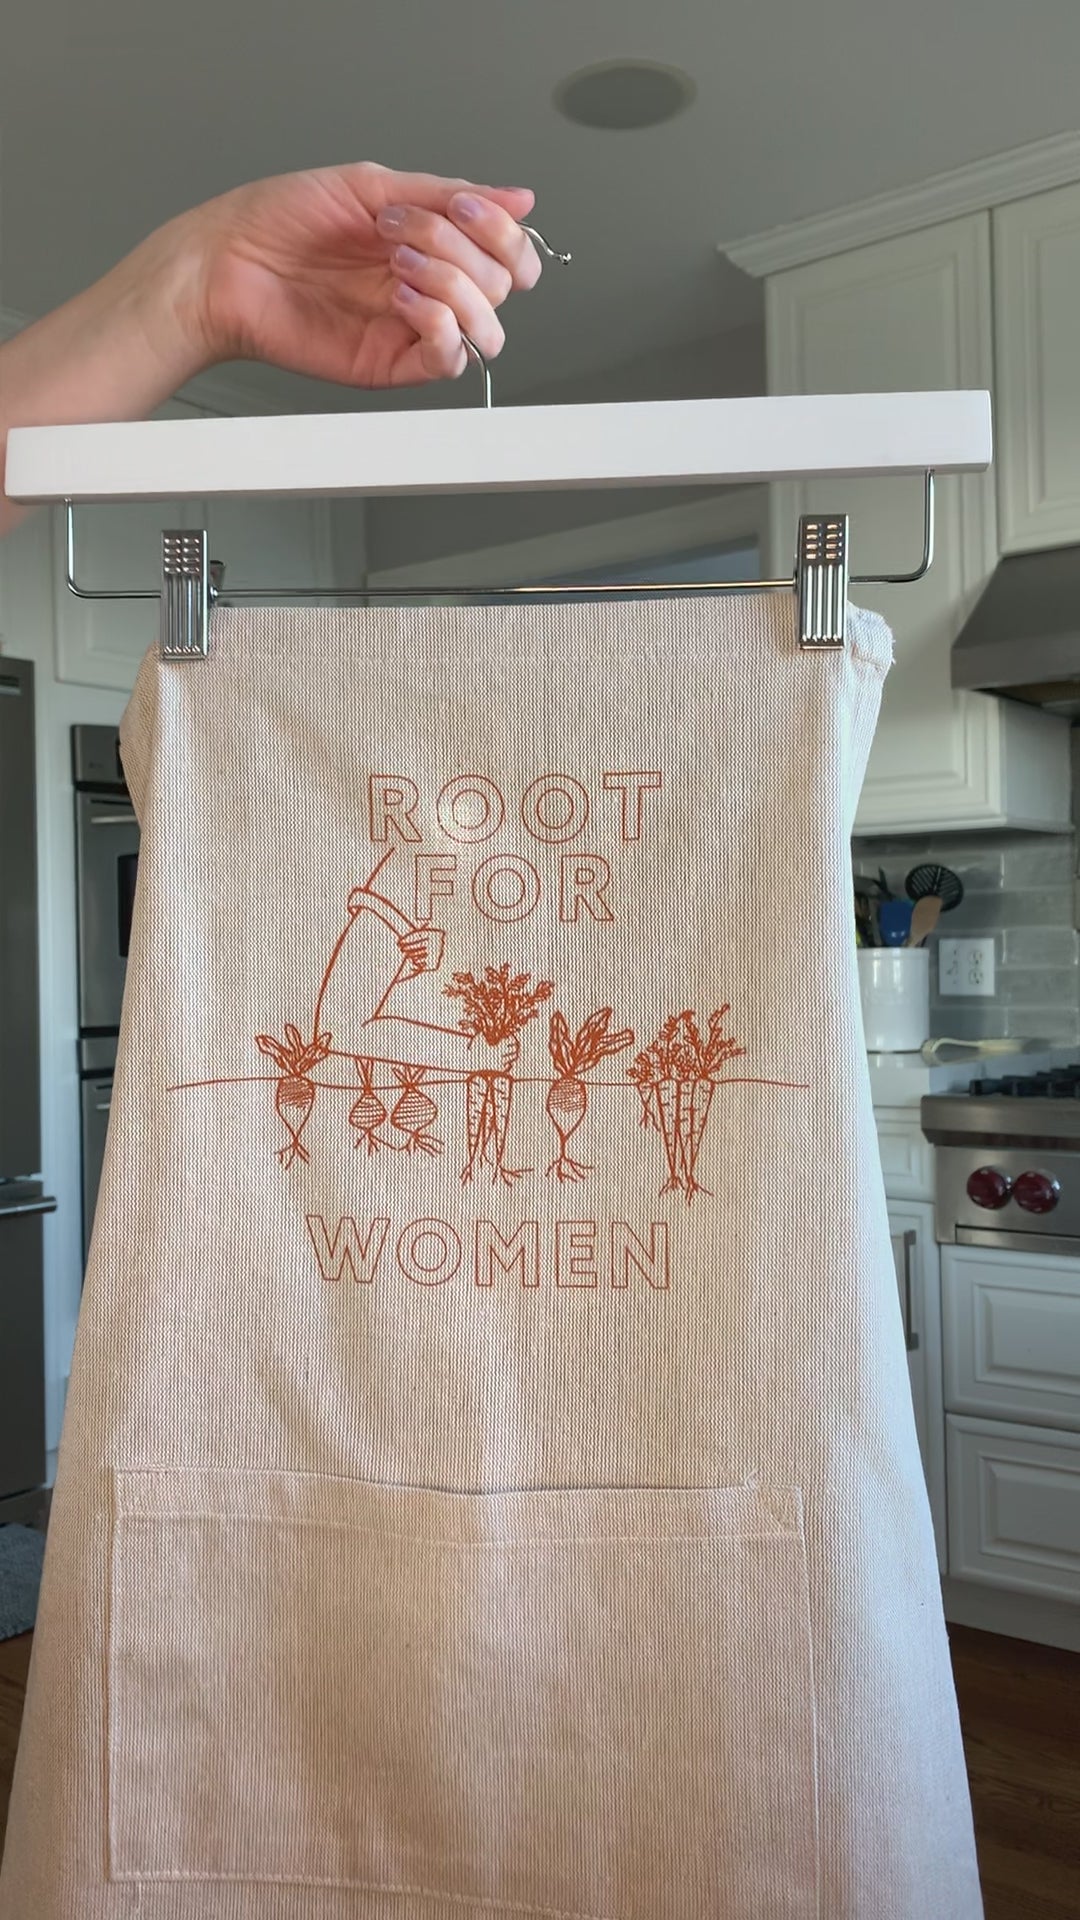 A natural chambray apron with orange block letters that read "Root for Women" hangs on a hanger